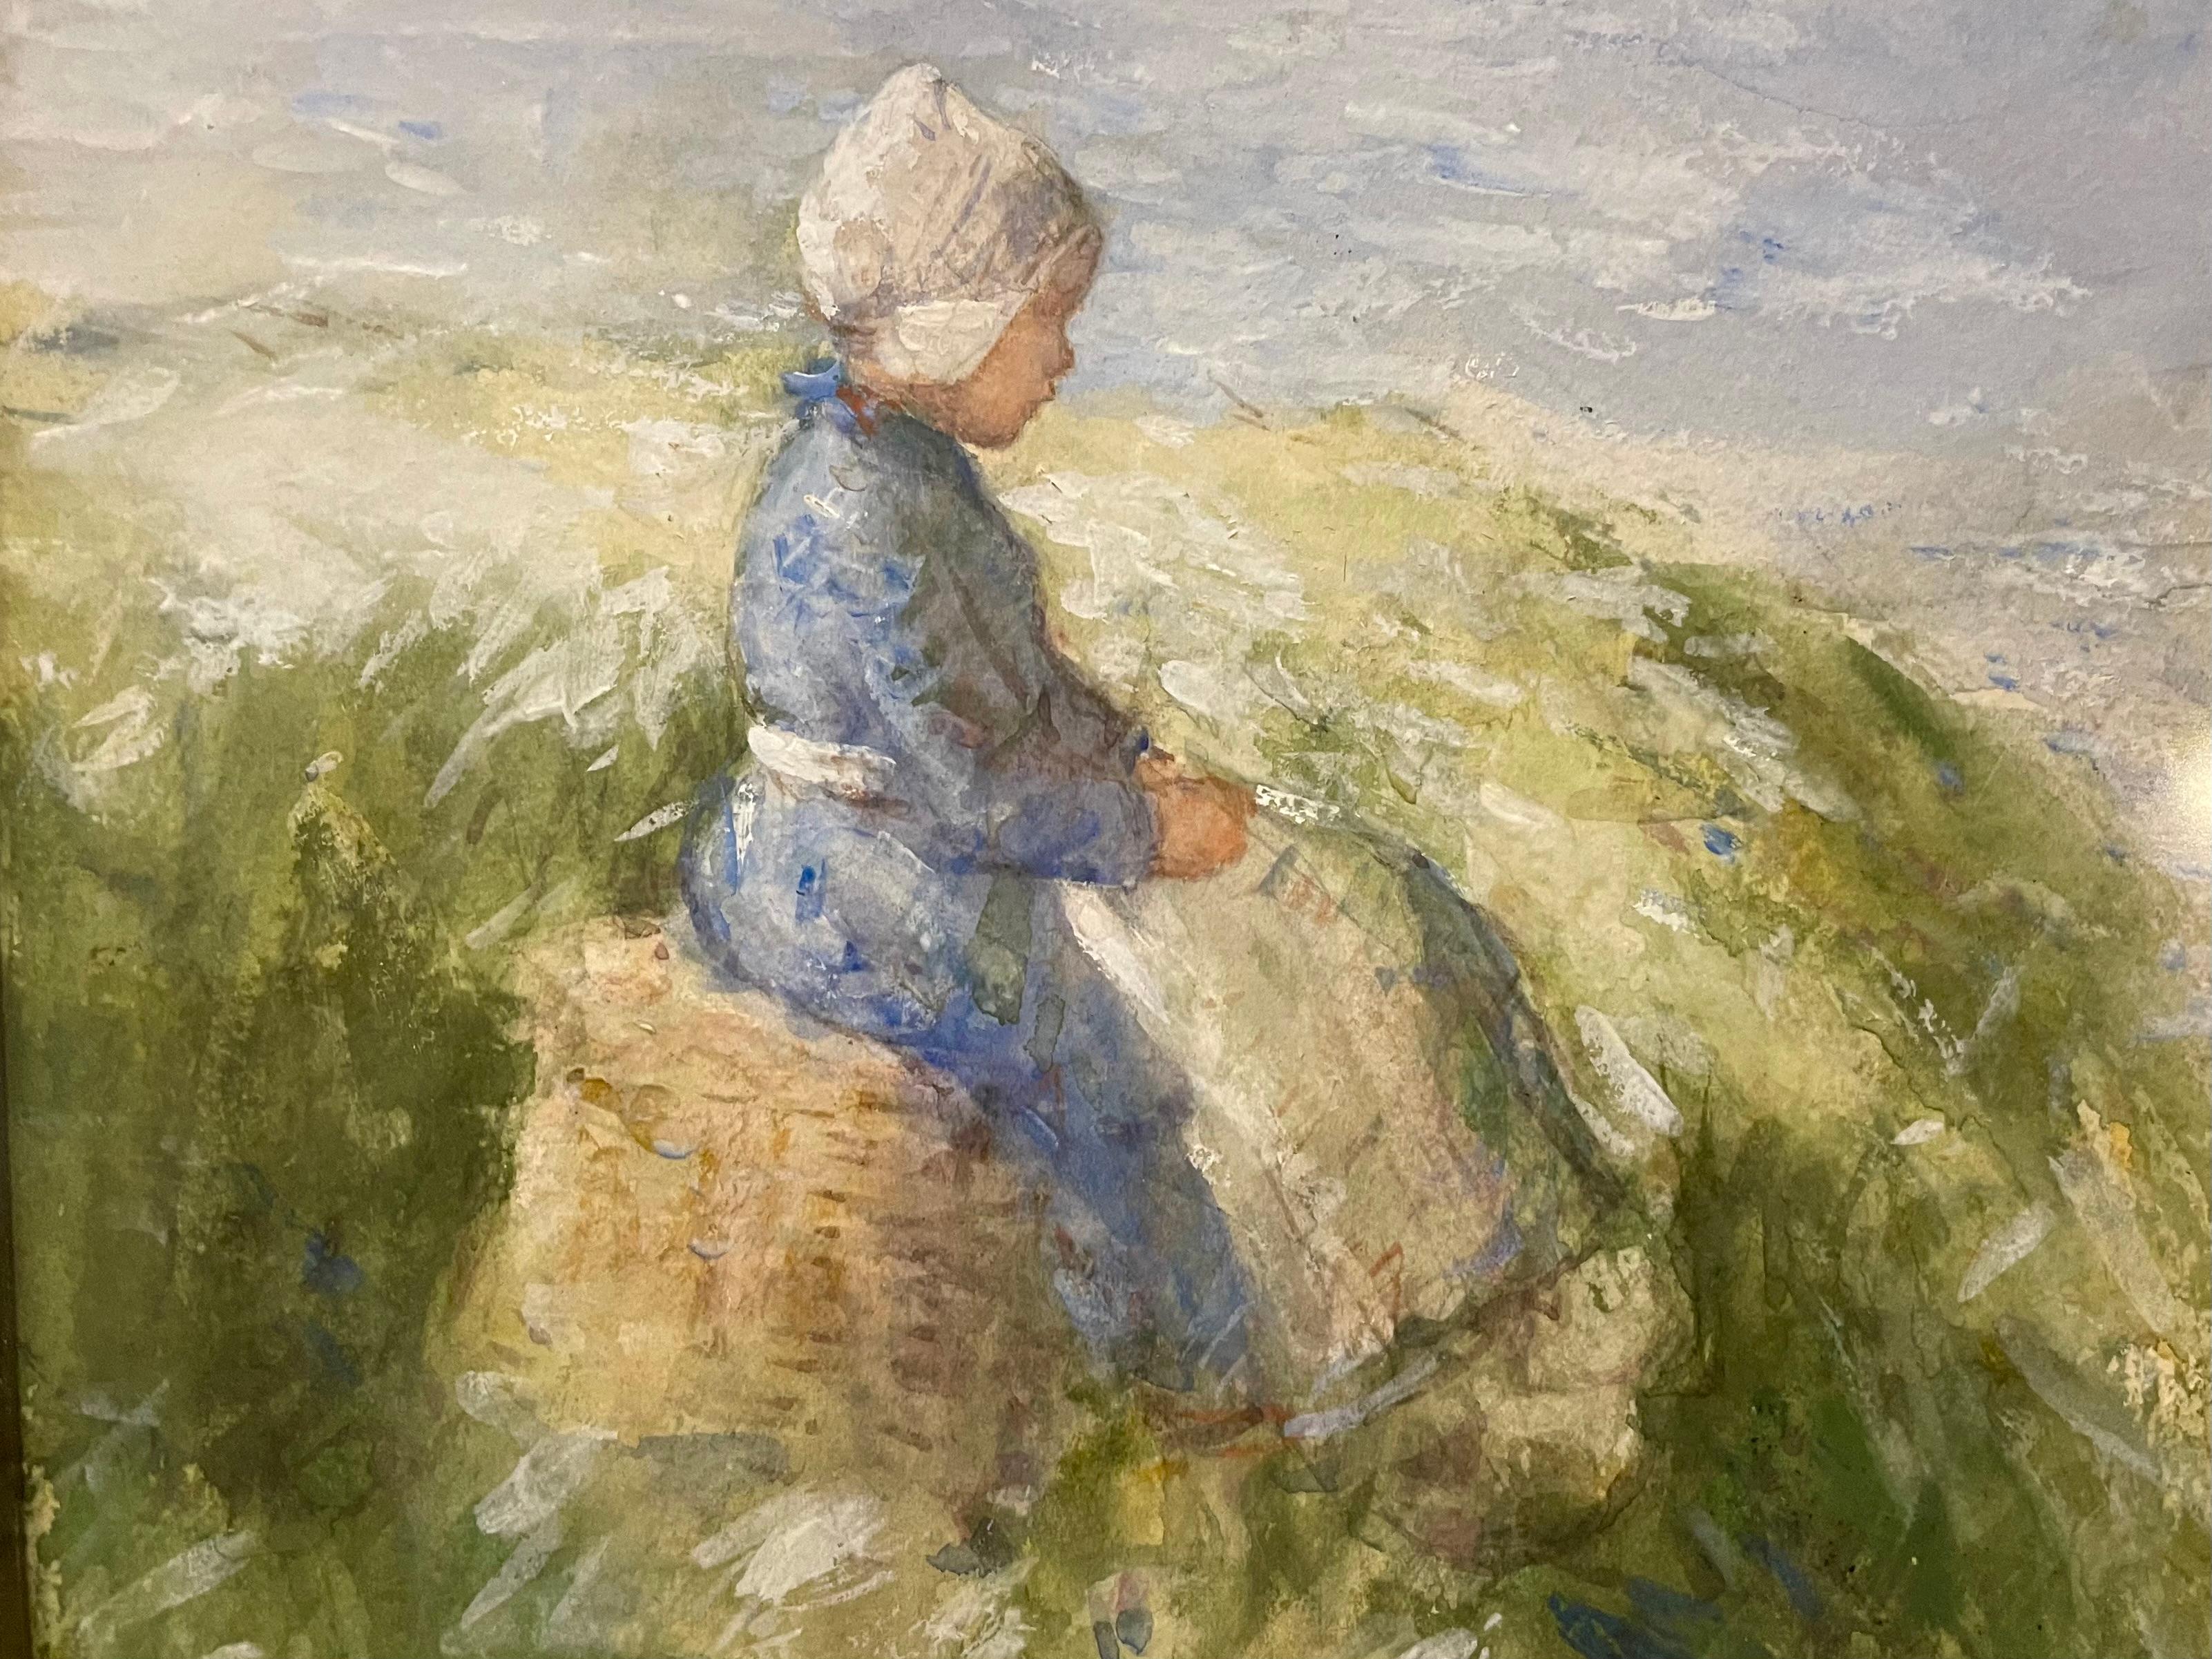 ‘Waiting for Father’ is a charming painting depicting a 19th century child waiting by the sea for her Scottish fisherman father to return. Robert Gemmel Hutchison (1860-1936), is renowned for his delightful paintings of children. His watercolors are